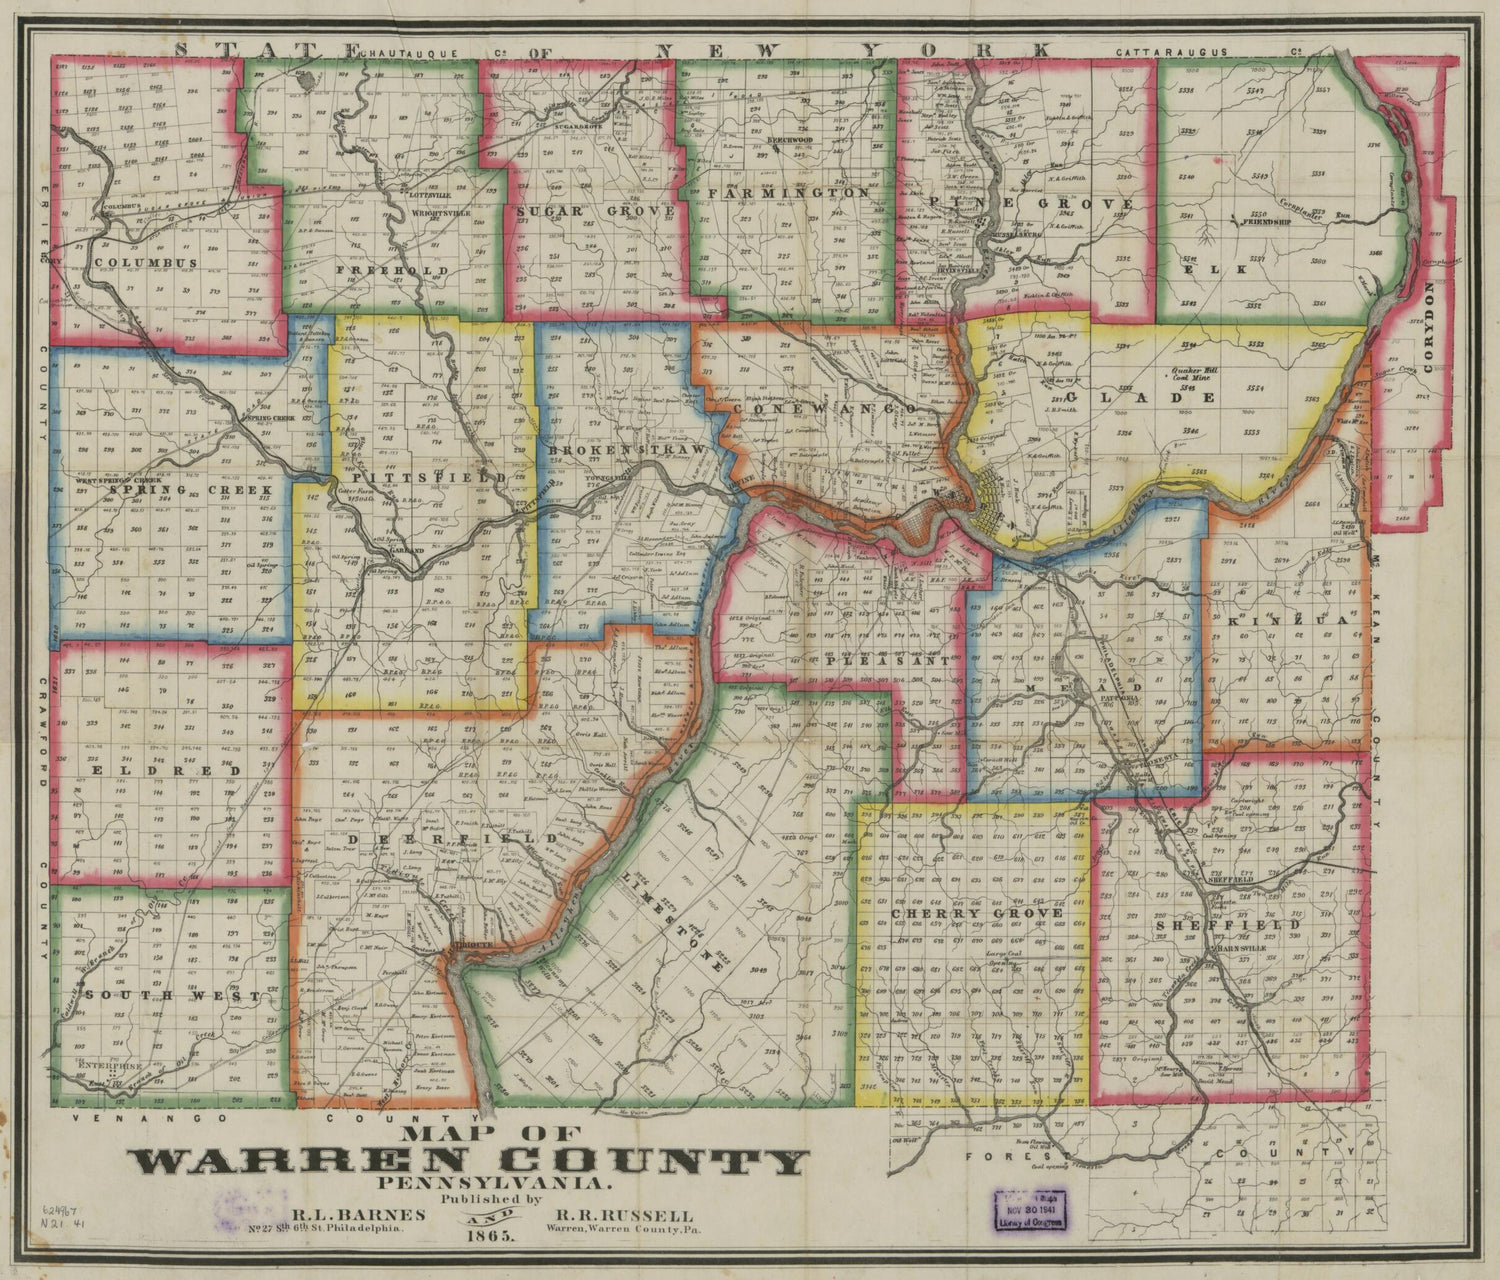 This old map of Map of Warren County, Pennsylvania from 1865 was created by Rufus L. Barnes, R. R. Russell in 1865